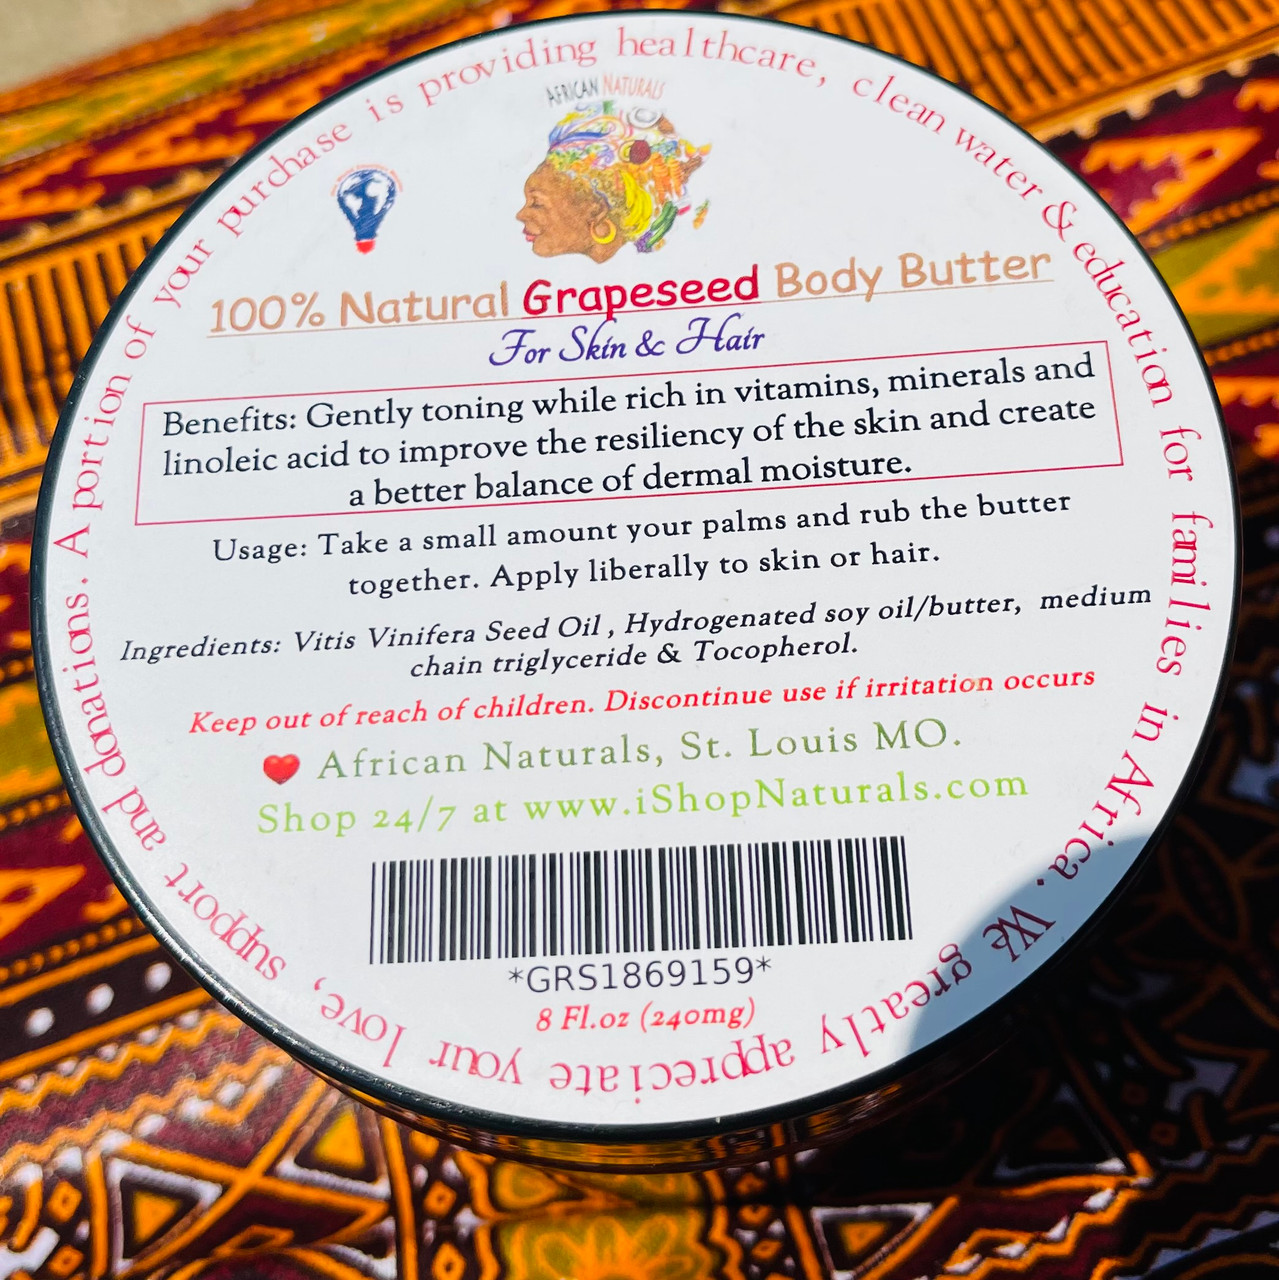 100% Natural Grapeseed Body Butter For Hair & Skin Care